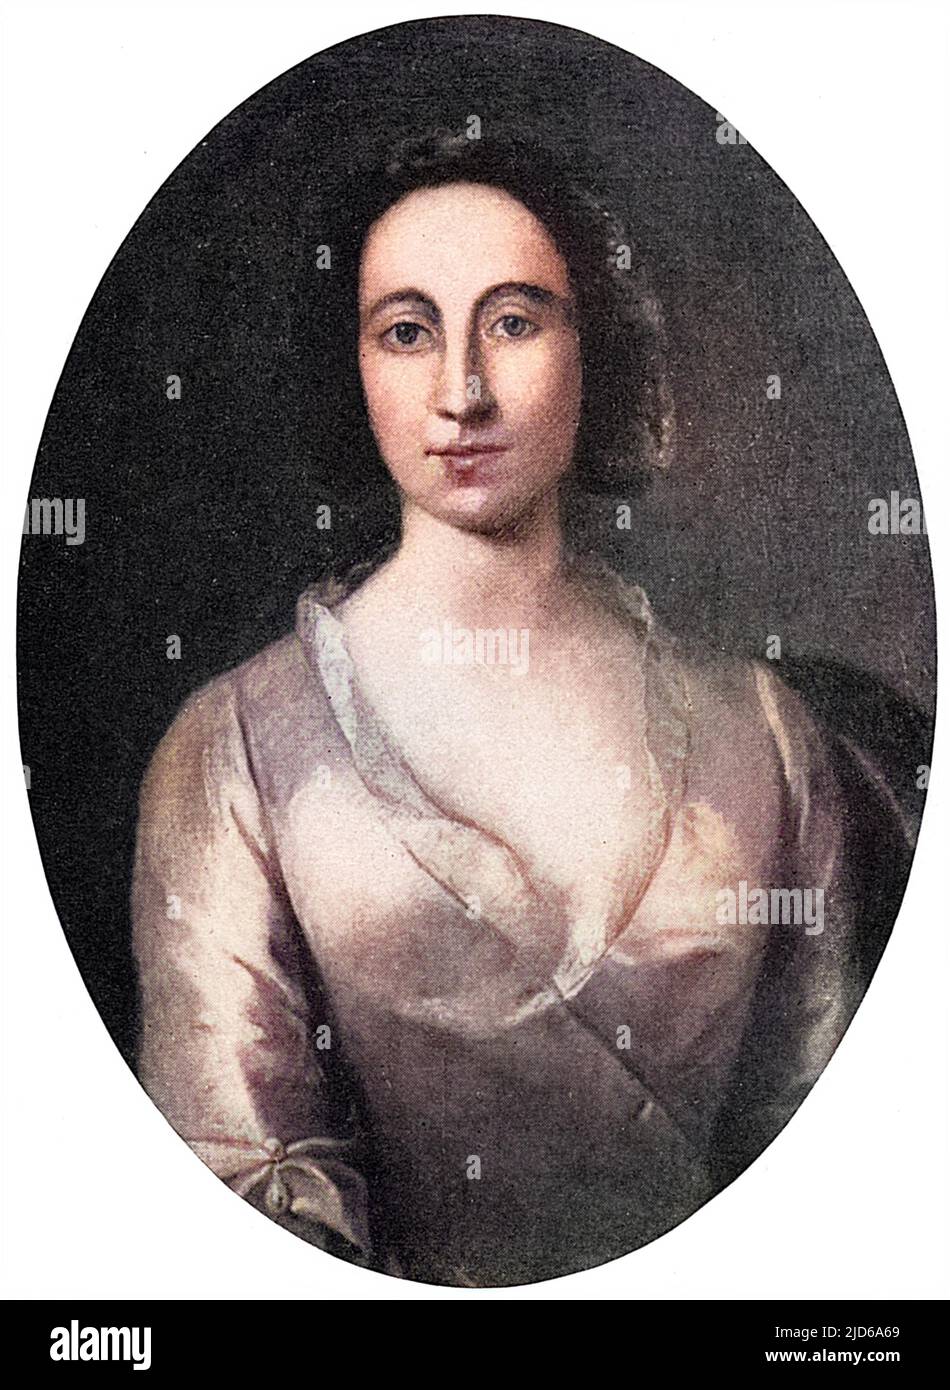 ANNIE LAURIE of Maxwelton, beloved by William Douglas of Fingland, to whom the ballad is attributed, but who married Alexander Fergusson of Craig- darroch, promises forgotten... Colourised version of : 10162884       Date: 1680S - 1760S Stock Photo